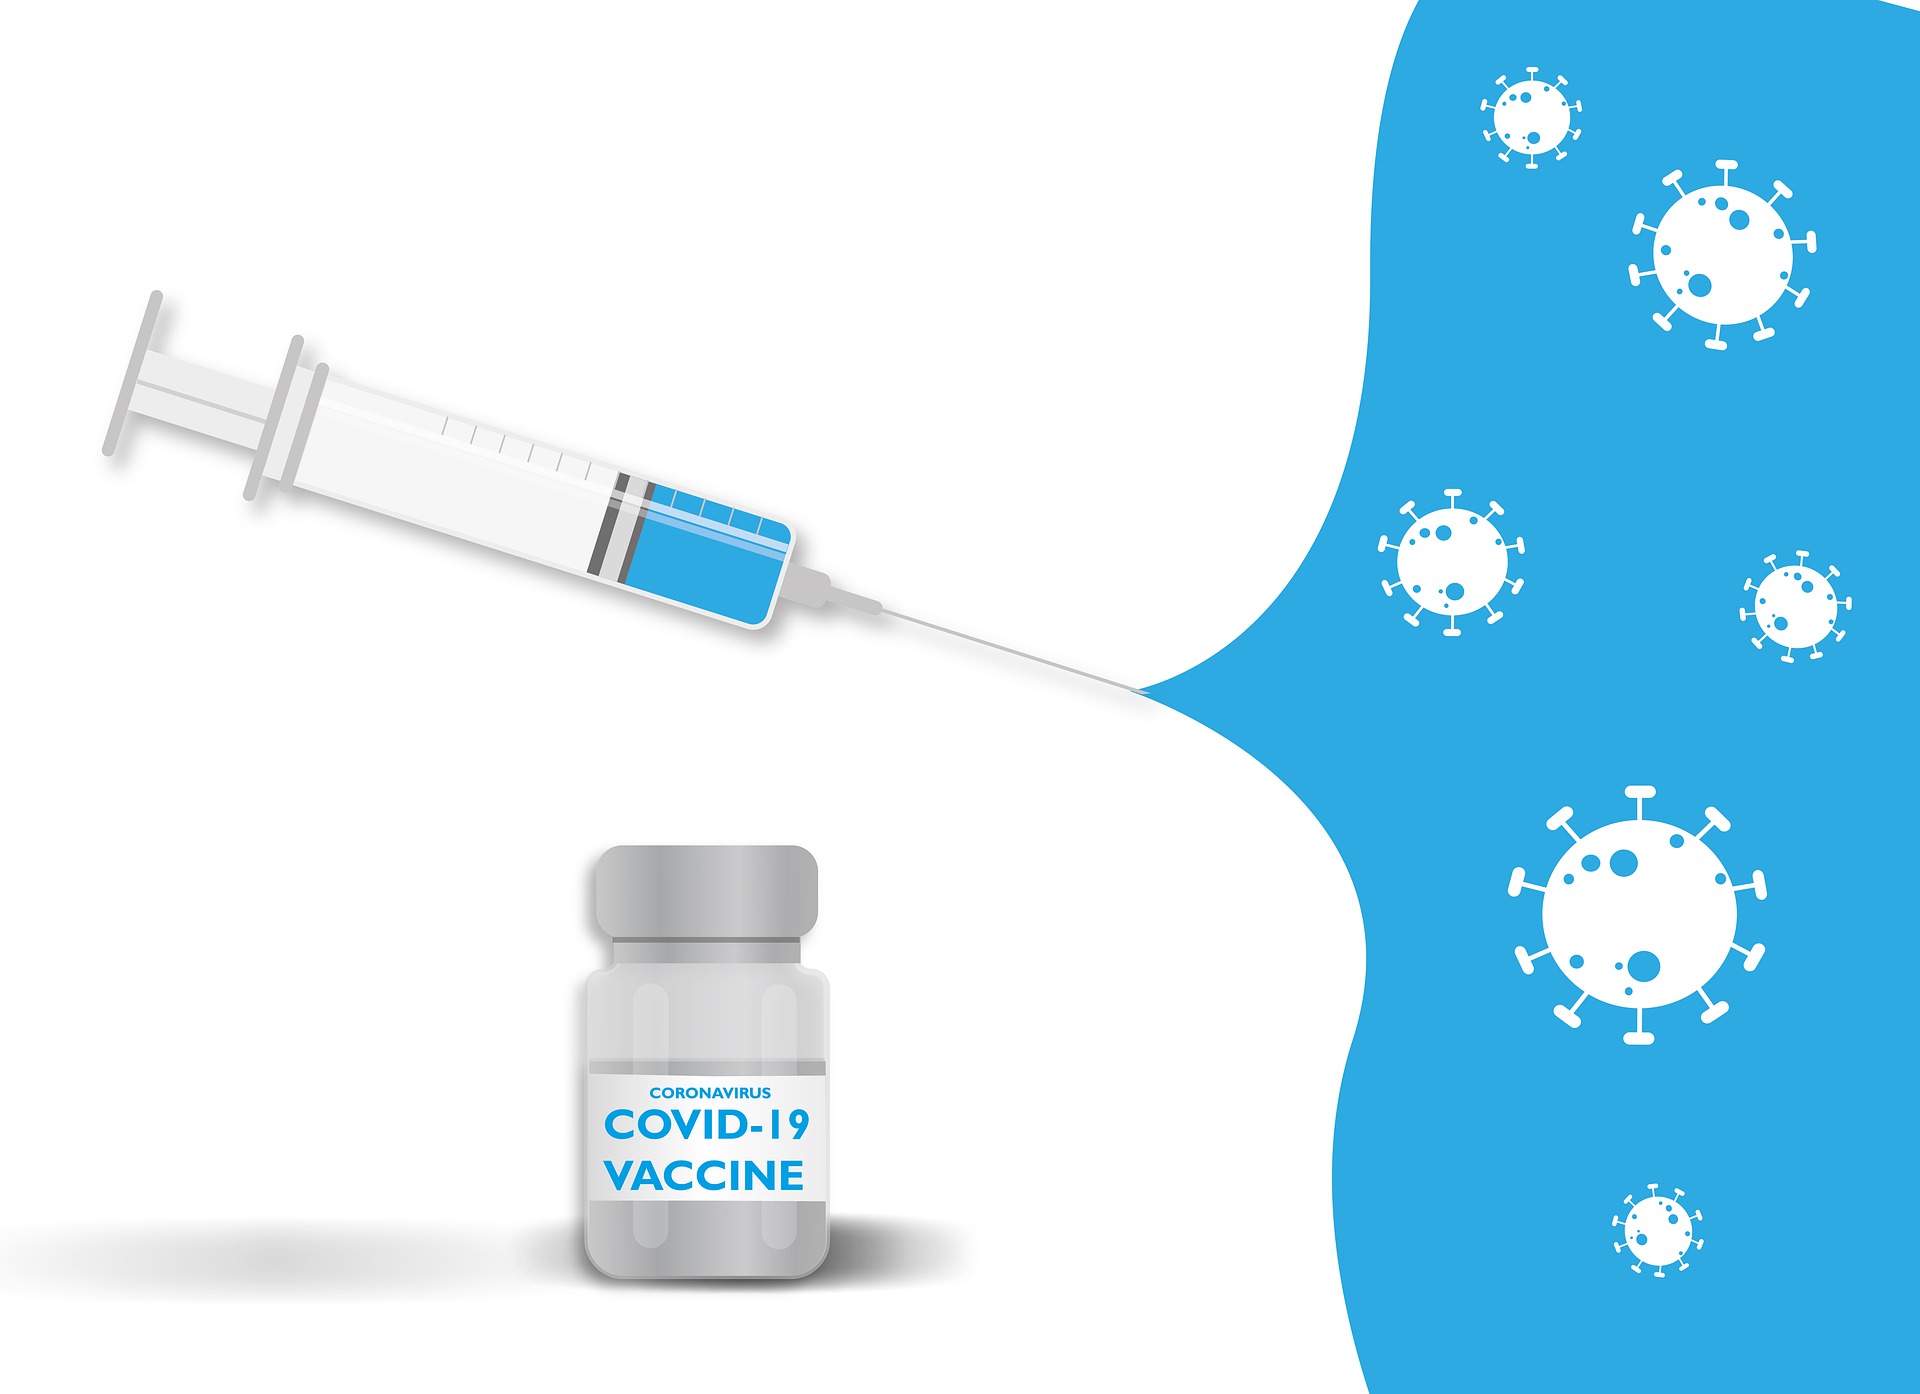 Covid-19 vaccination: can I tell my employees to get the “jab”?